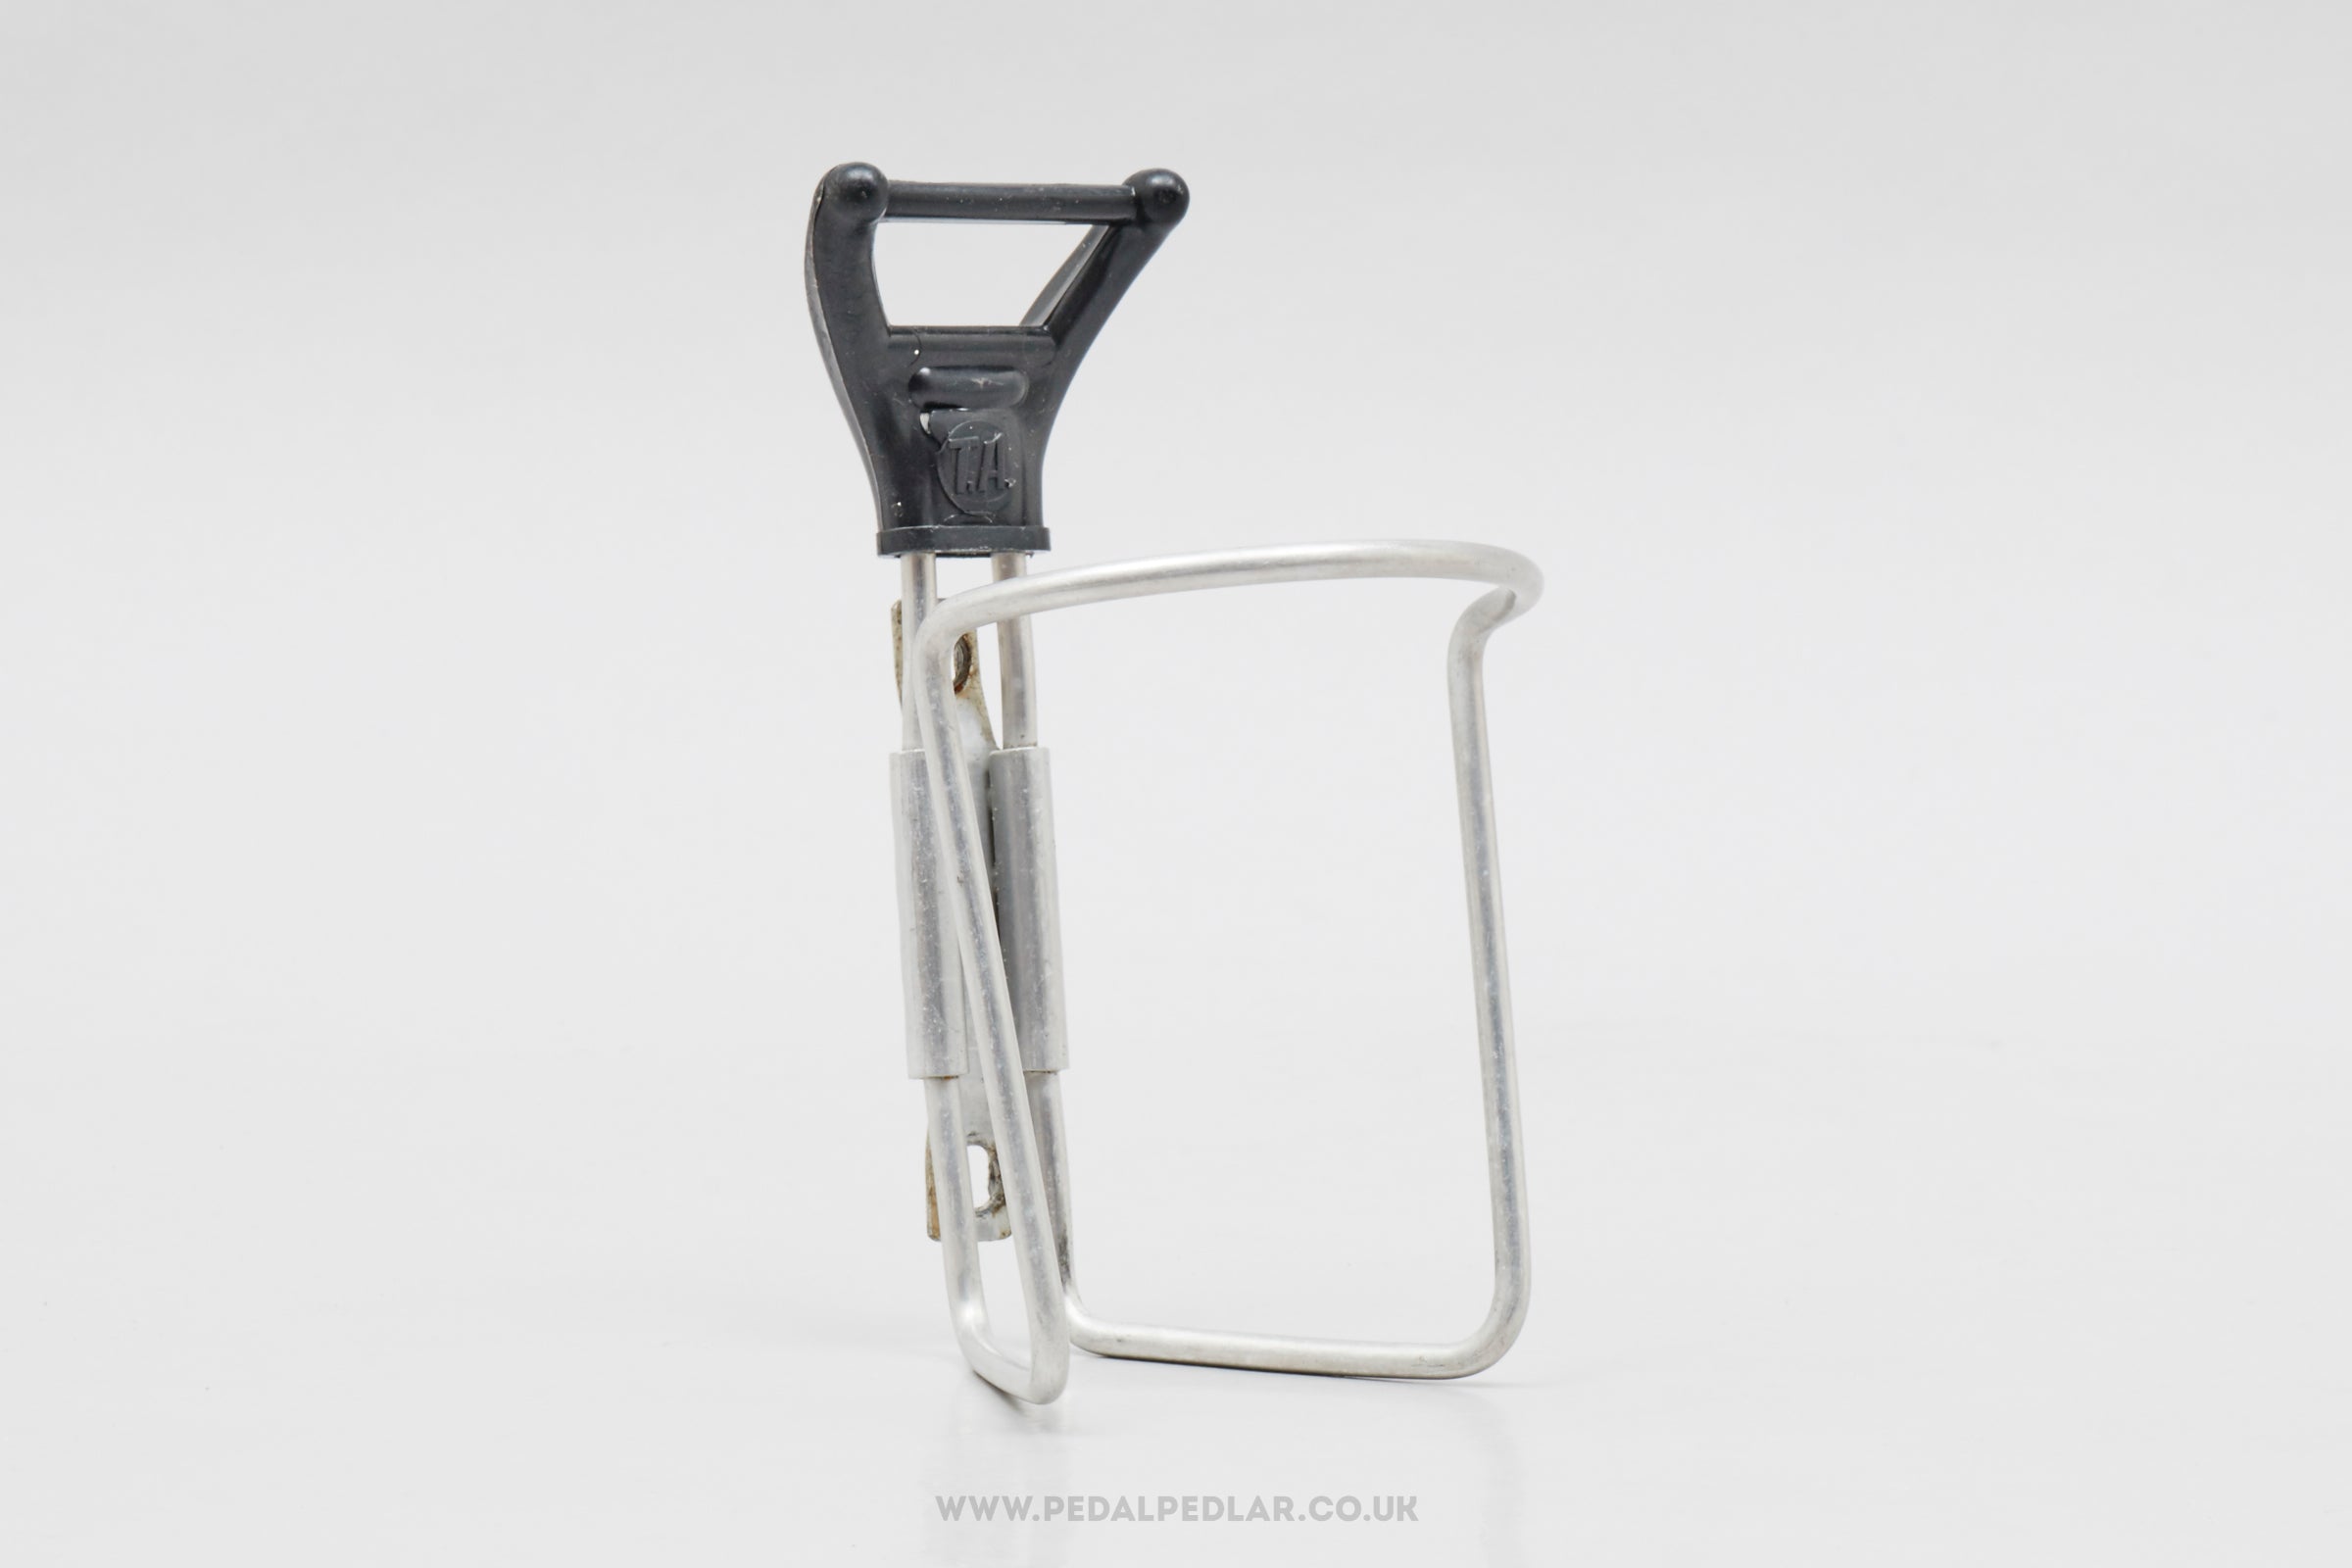 Specialites T.A. 'Plum' (417) Later Version Vintage Silver Bottle Cage - Pedal Pedlar - Cycle Accessories For Sale